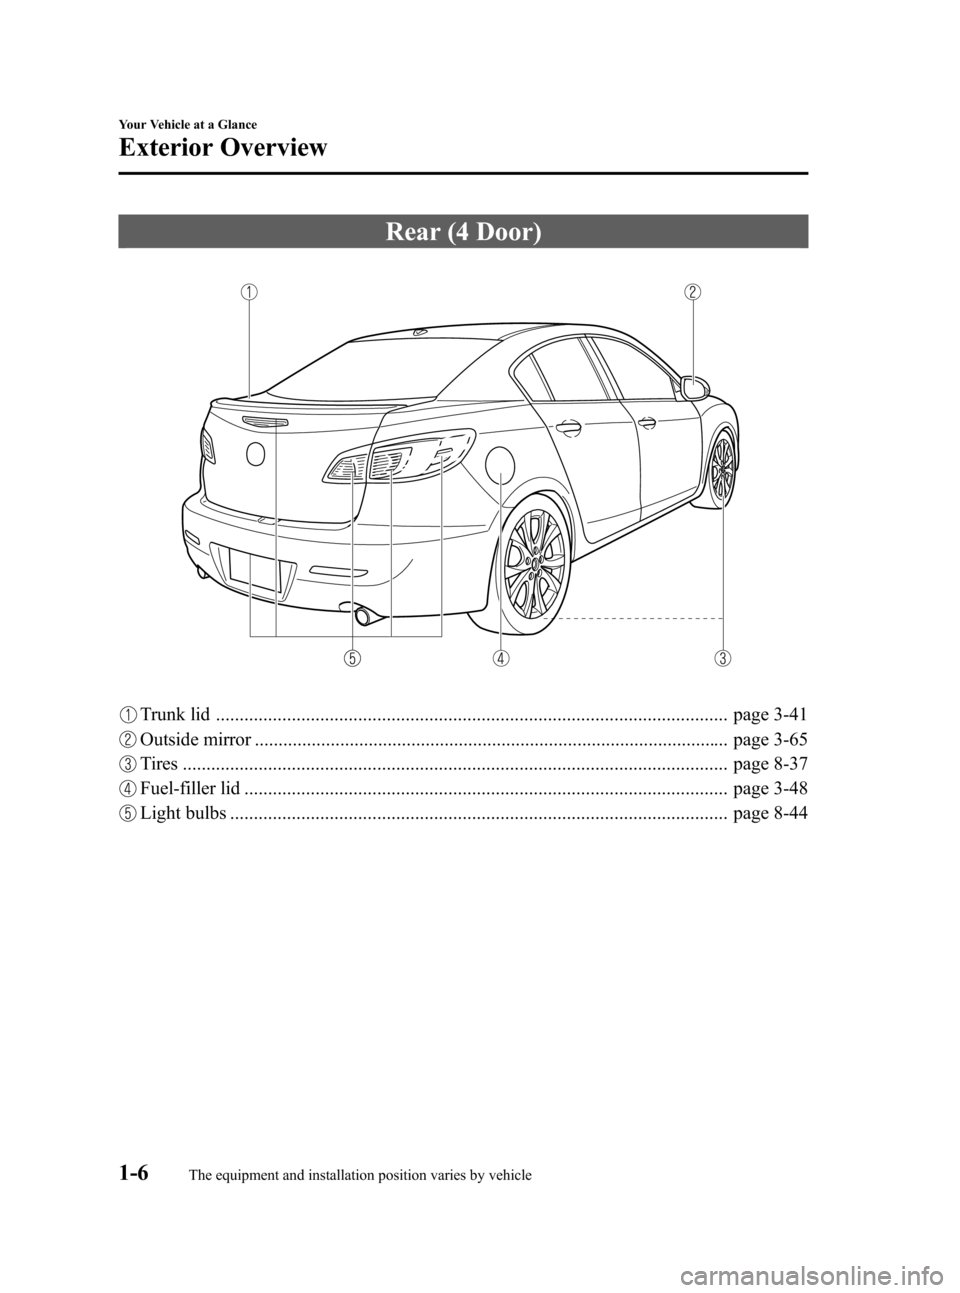 MAZDA MODEL 3 HATCHBACK 2012  Owners Manual (in English) Black plate (12,1)
Rear (4 Door)
Trunk lid ............................................................................................................ page 3-41
Outside mirror .......................